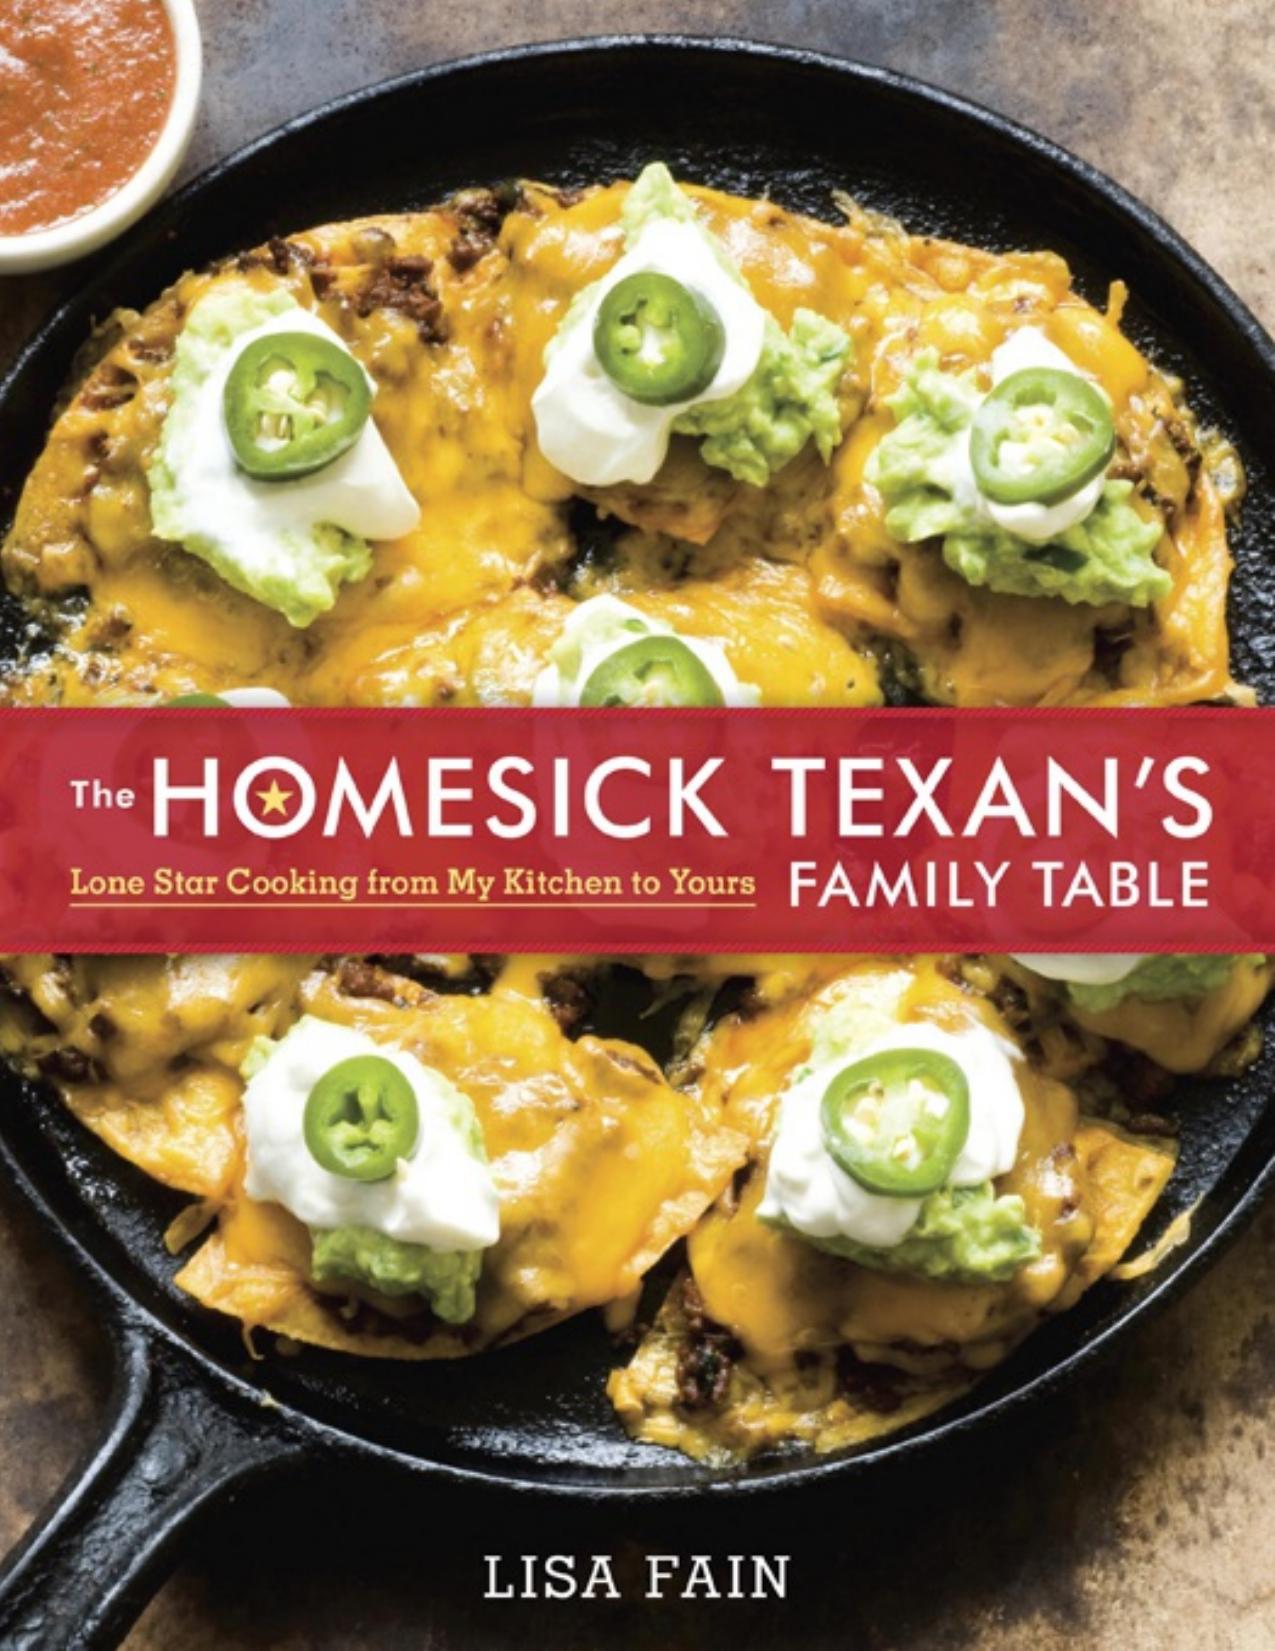 The Homesick Texan's Family Table Lone Star Cooking from My Kitchen to Yours by Lisa Fain